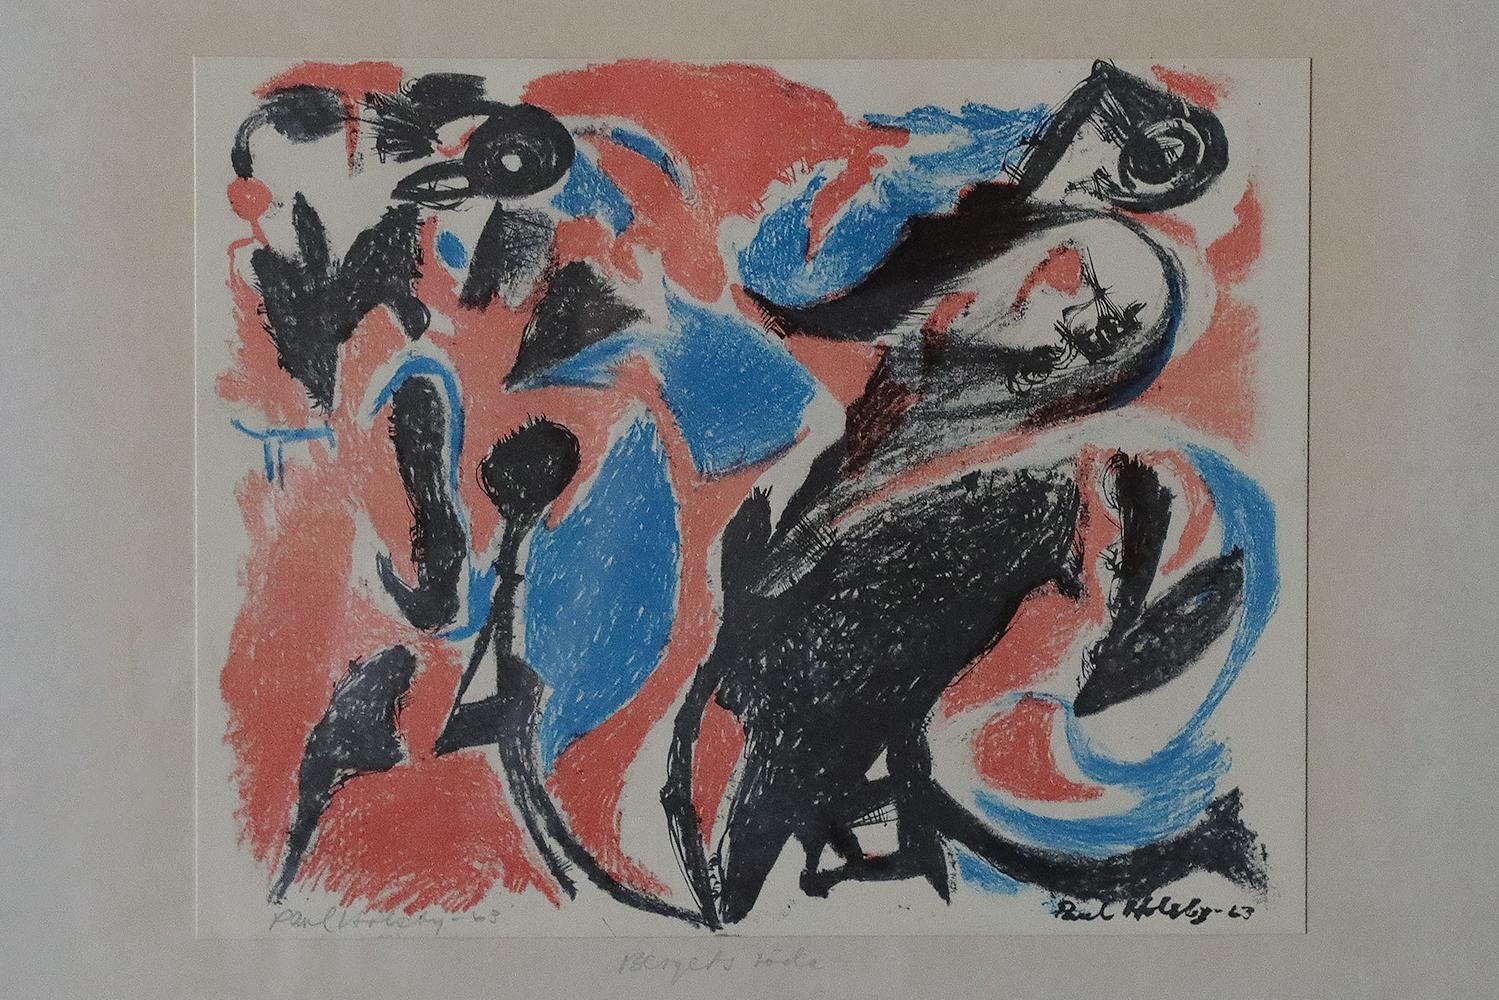 Paul Holsby, Bergets röda, 1963
Color lithograph
The work is signed by the artist, date, title and individual number (pencil)
Work dimensions 26/30
The work is framed

Paul Holsby was born in 1921 in Norrtälje, died in 2007 in Höganäs. He was